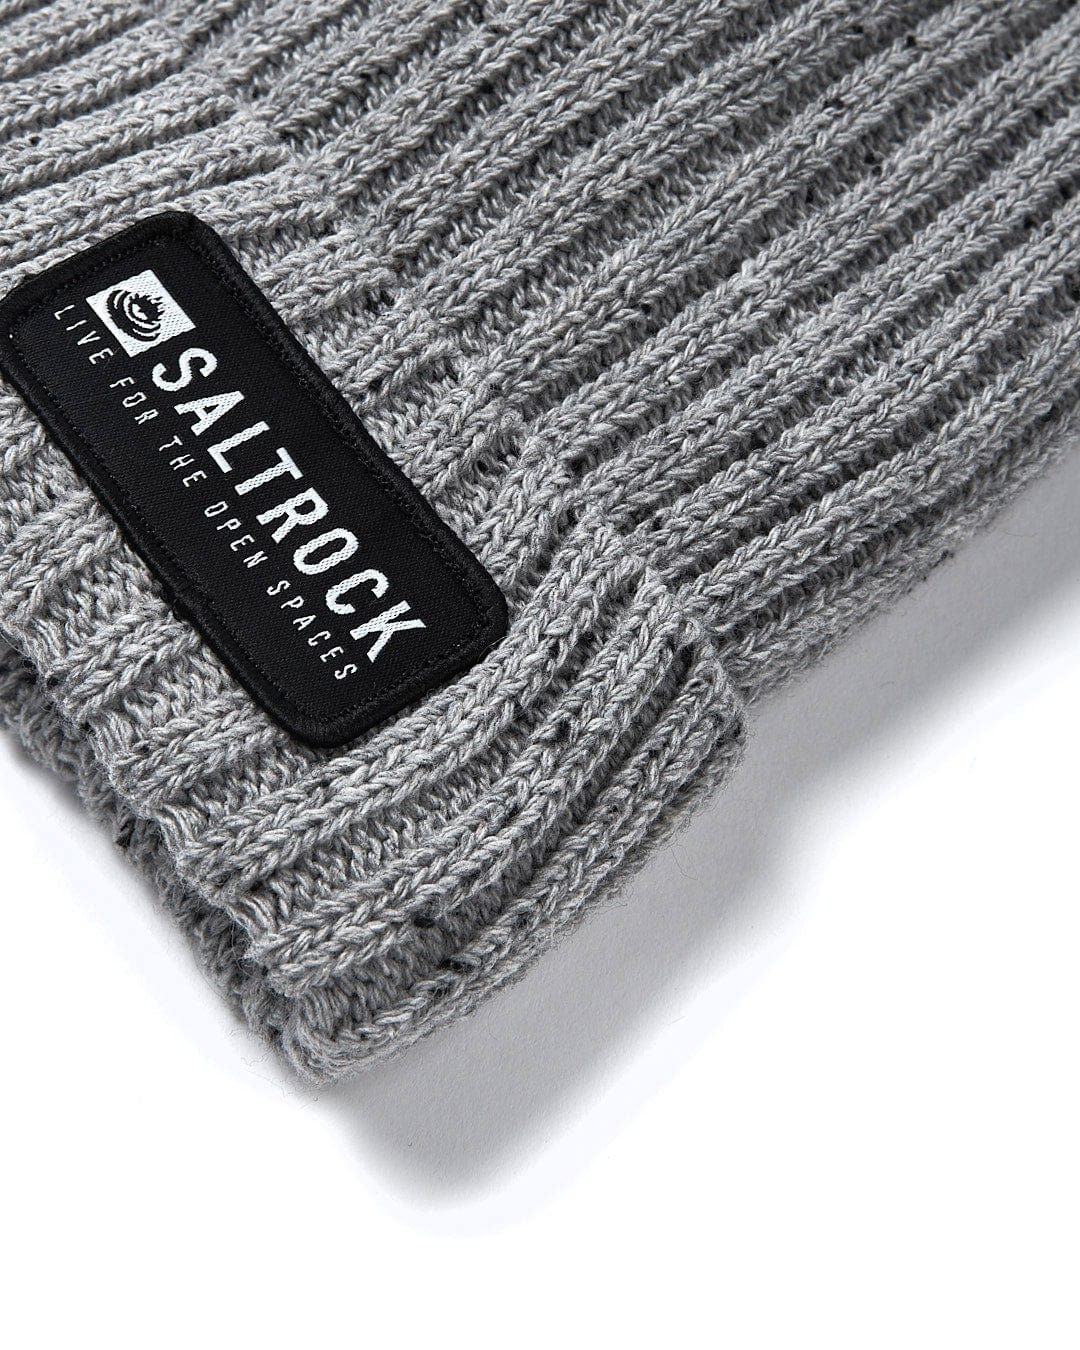 A chunky knit Heritage - Beanie - Grey with a Saltrock label, providing extra warmth.